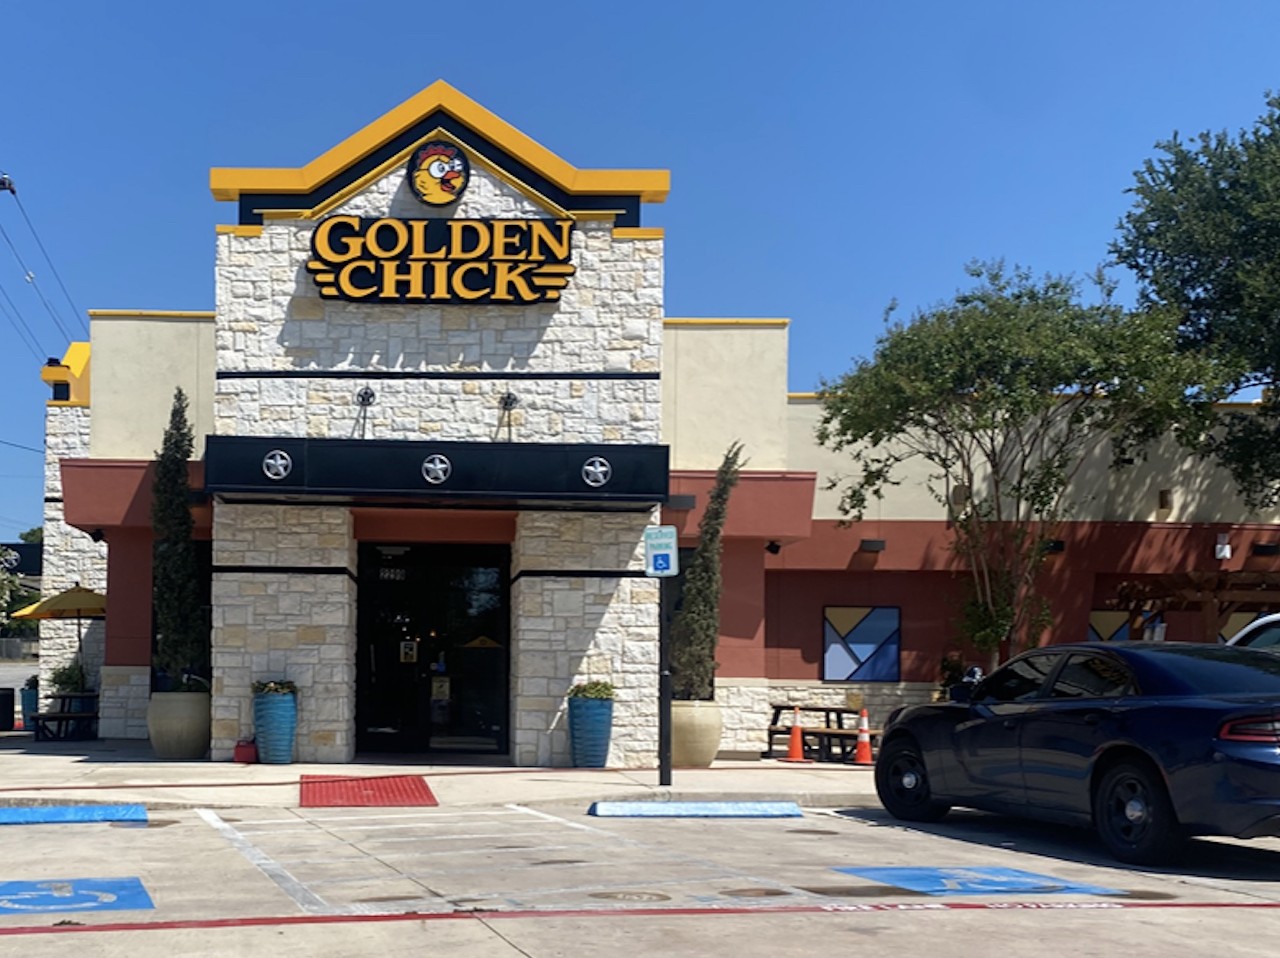 Golden Chick
2299 N.W. Military Highway, (210) 248-9461, locations.goldenchick.com
San Marcos chain Golden Chick now has eight San Antonio locations, with its most recent storefront located in Castle Hills. This Texas-based chain, which started in 1967, now has 200 storefronts across four states.